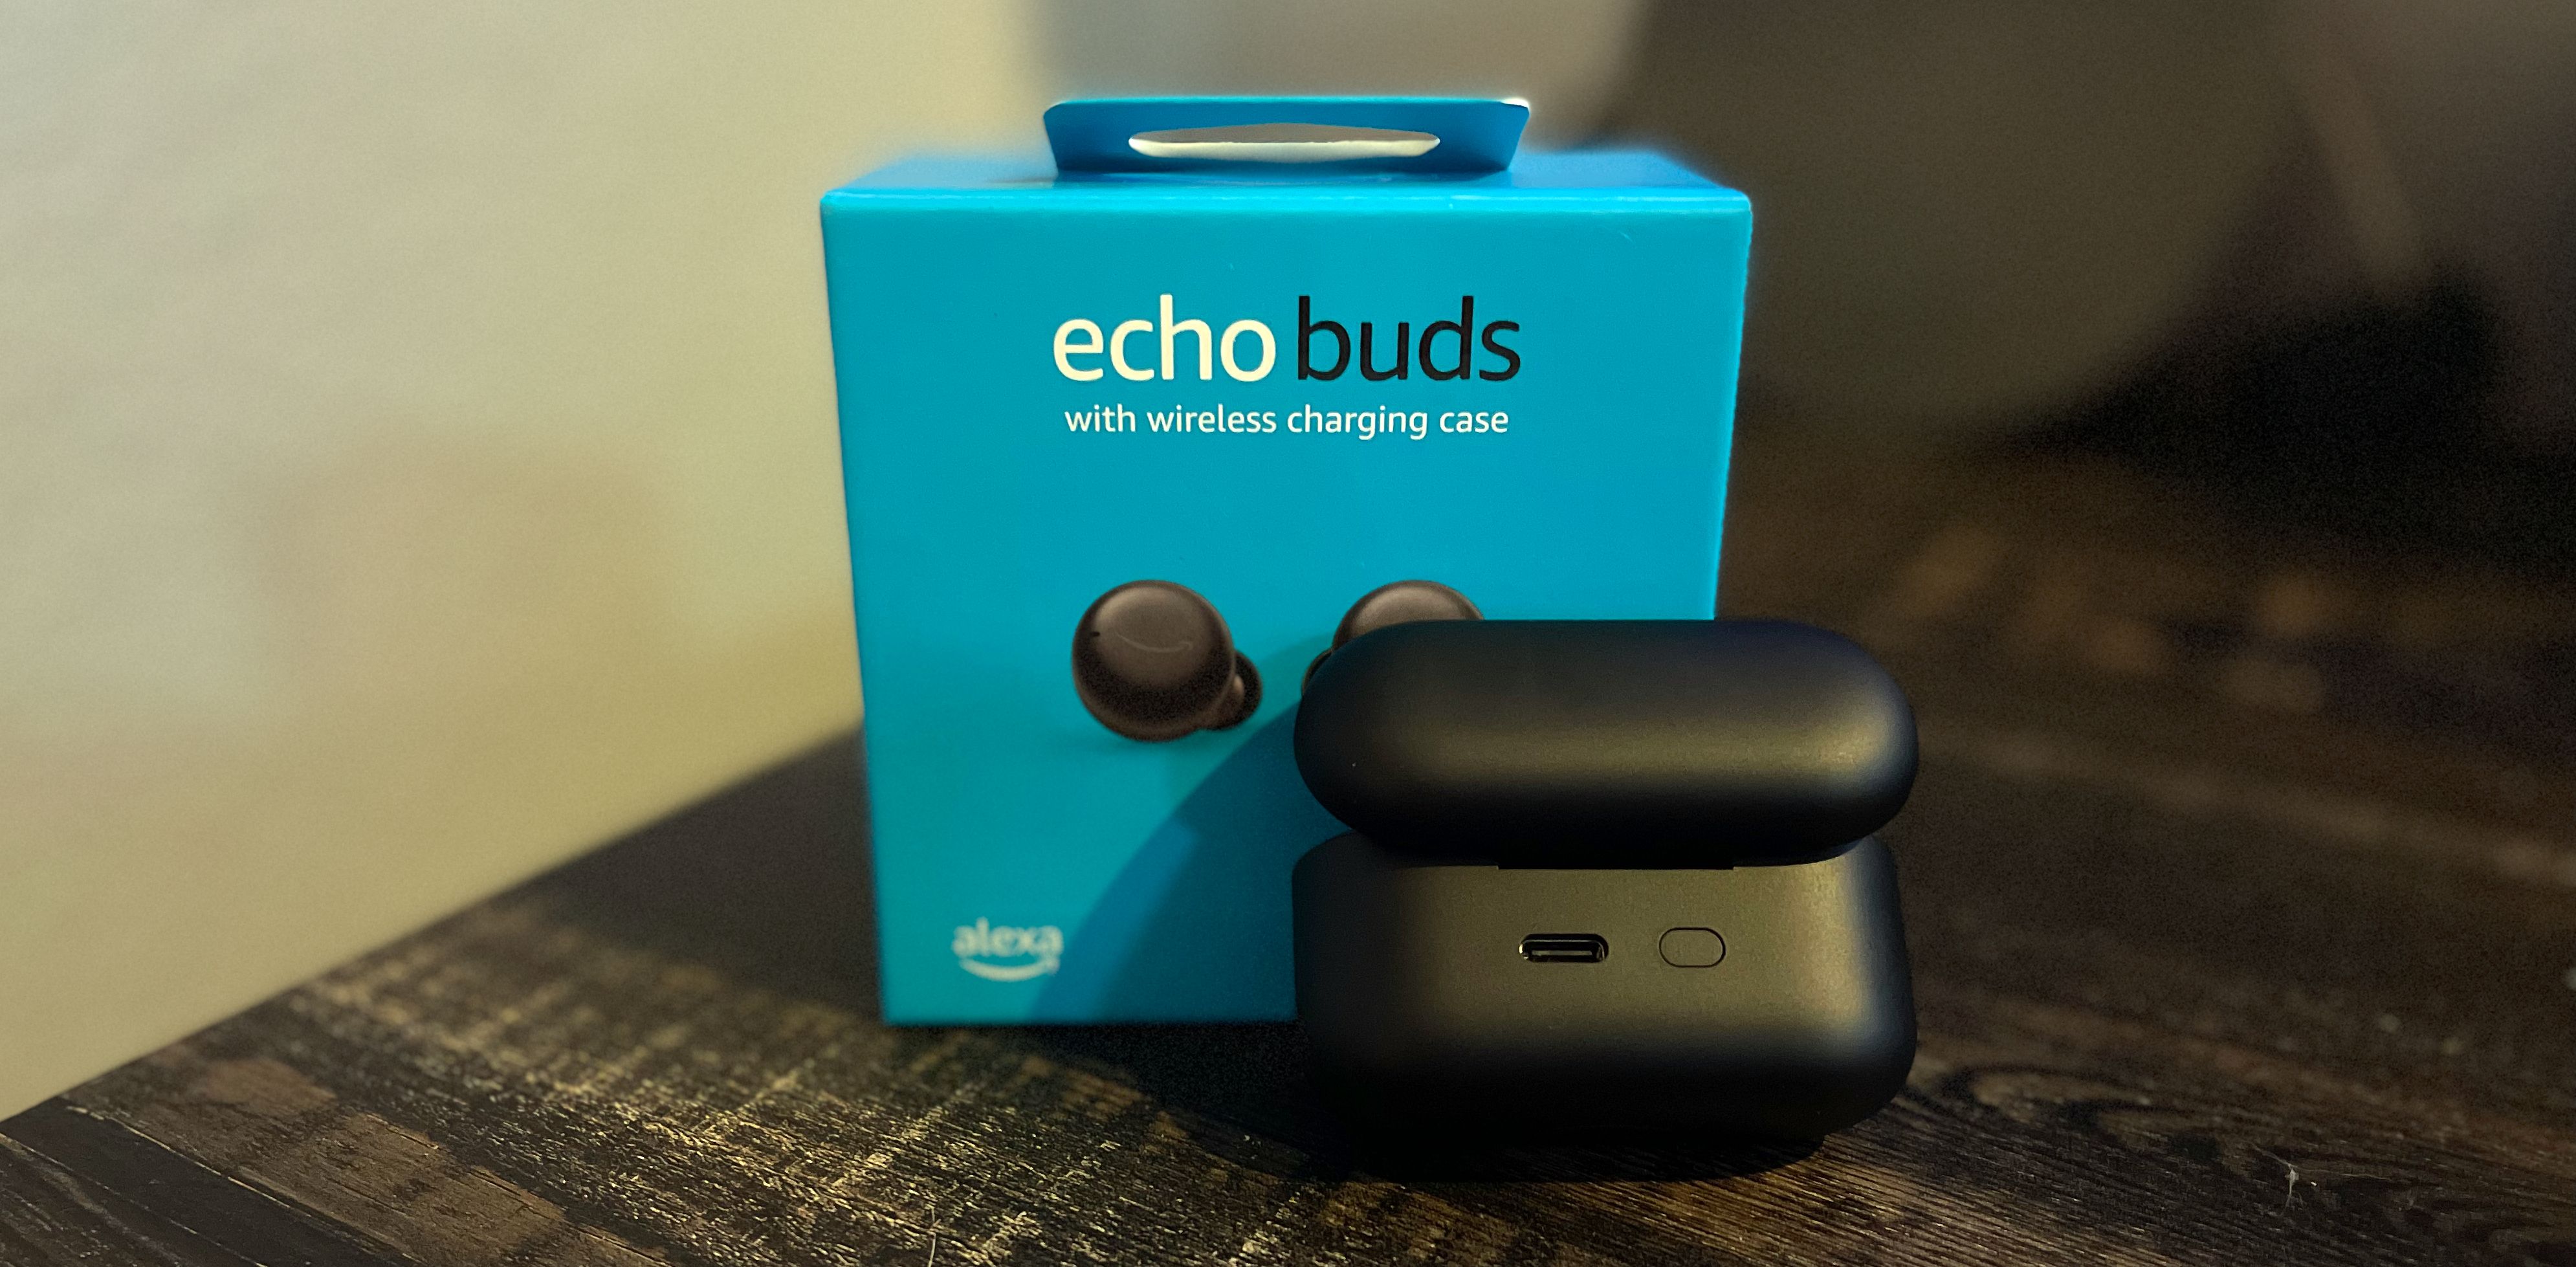 How to Set Up and Use Your Amazon Echo Buds